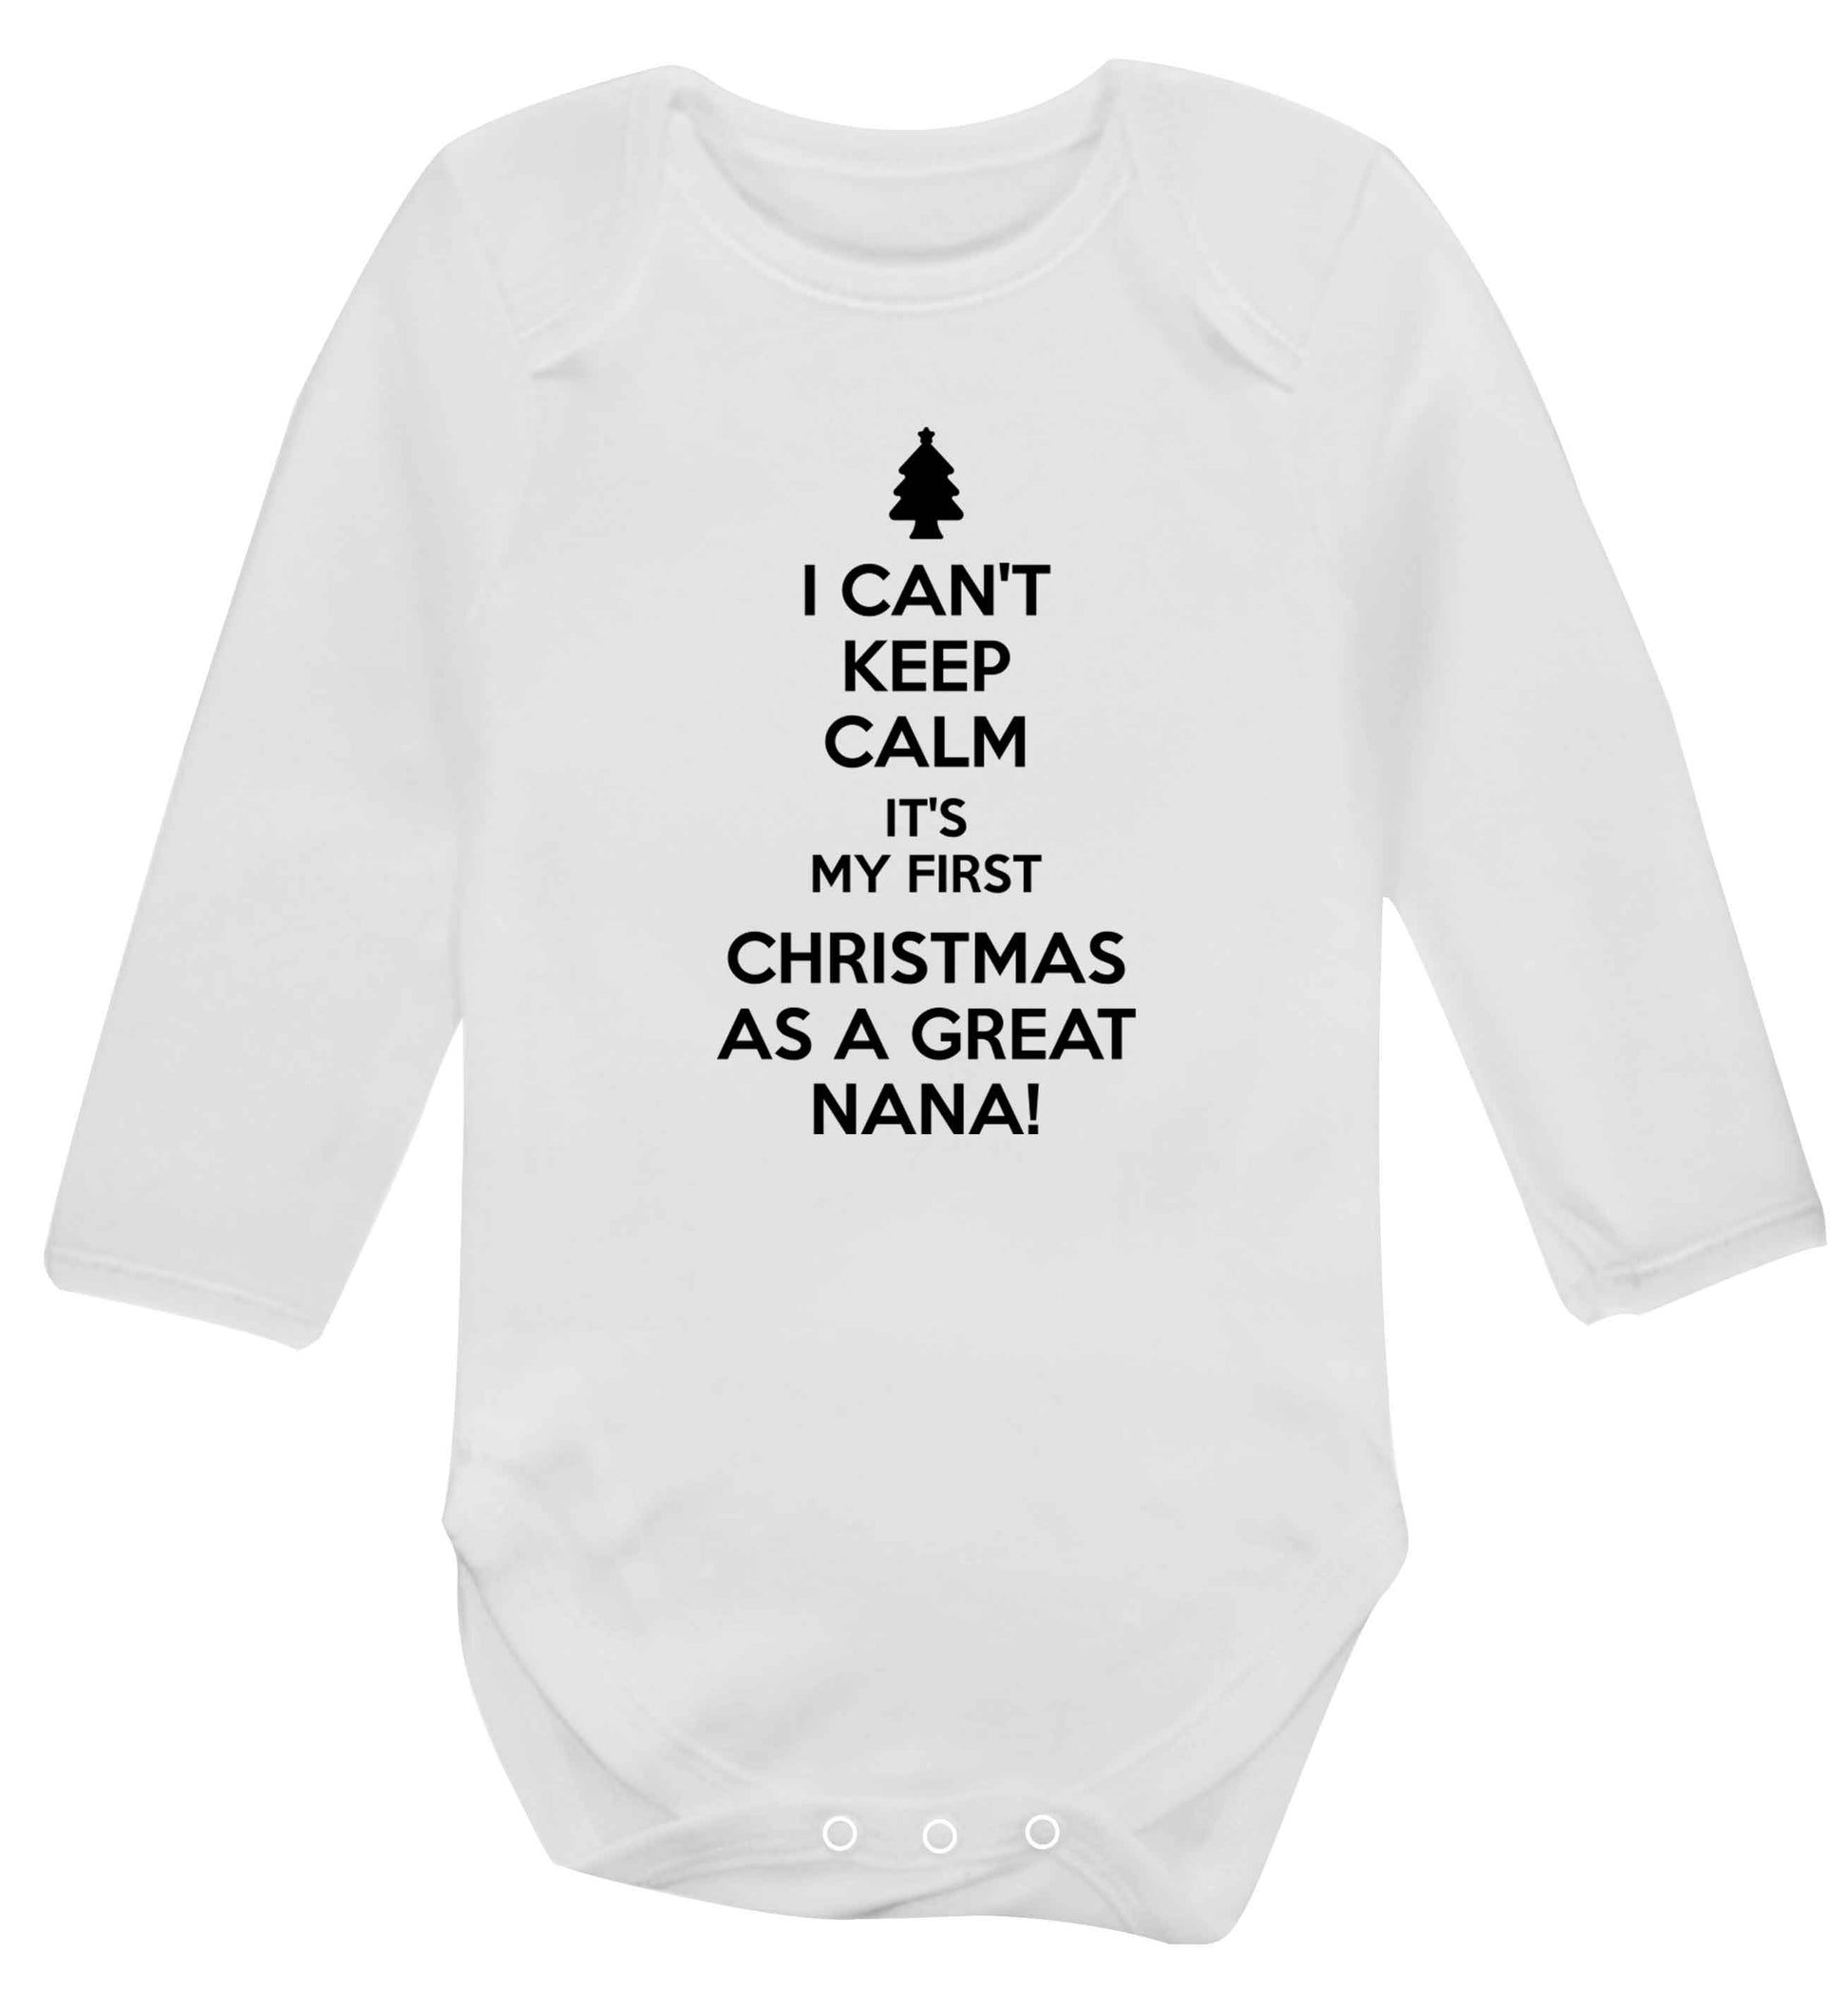 I can't keep calm it's my first Christmas as a great nana! Baby Vest long sleeved white 6-12 months